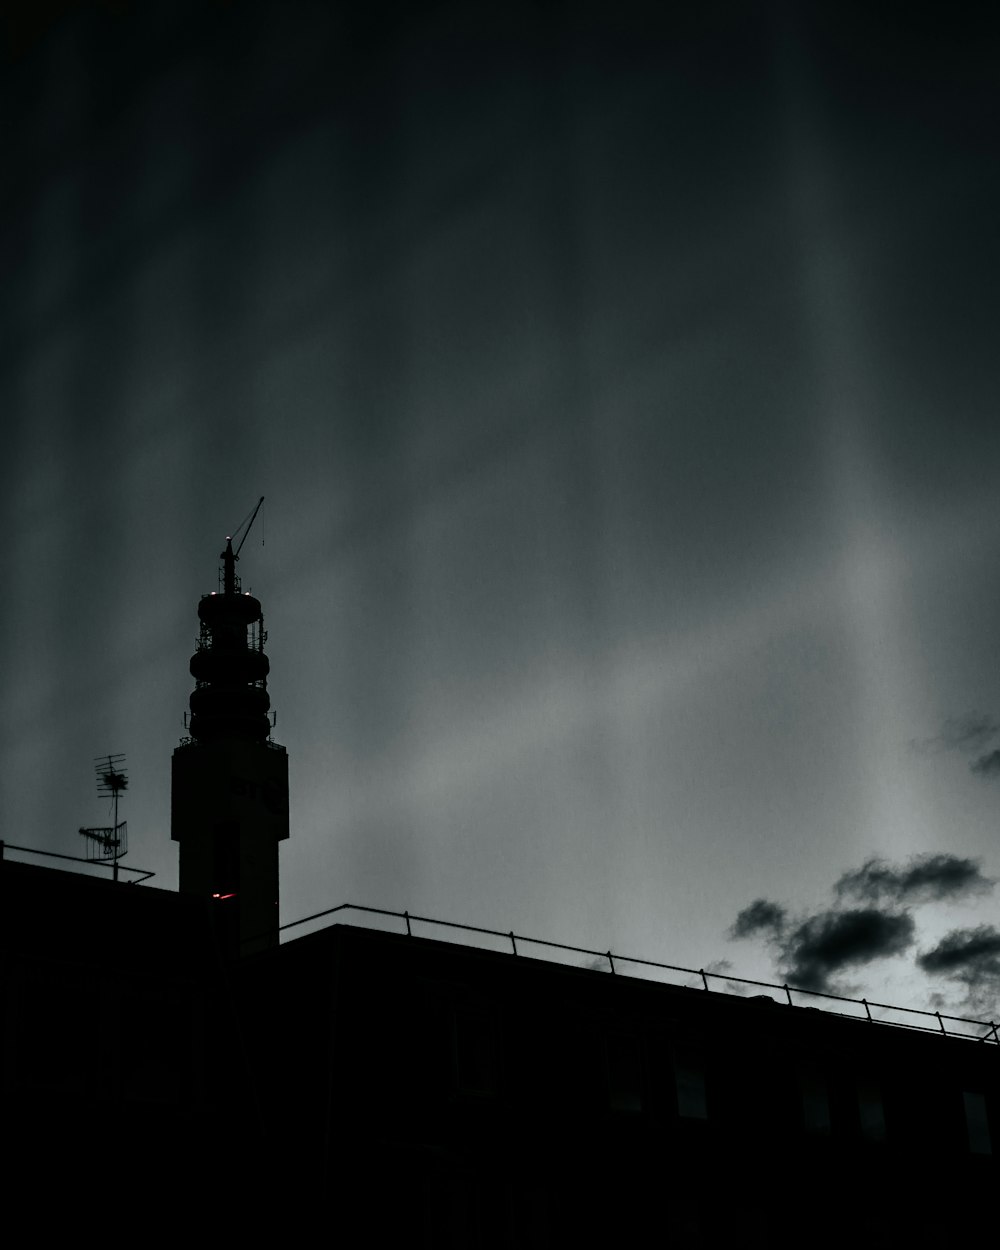 silhouette of tower under cloudy sky